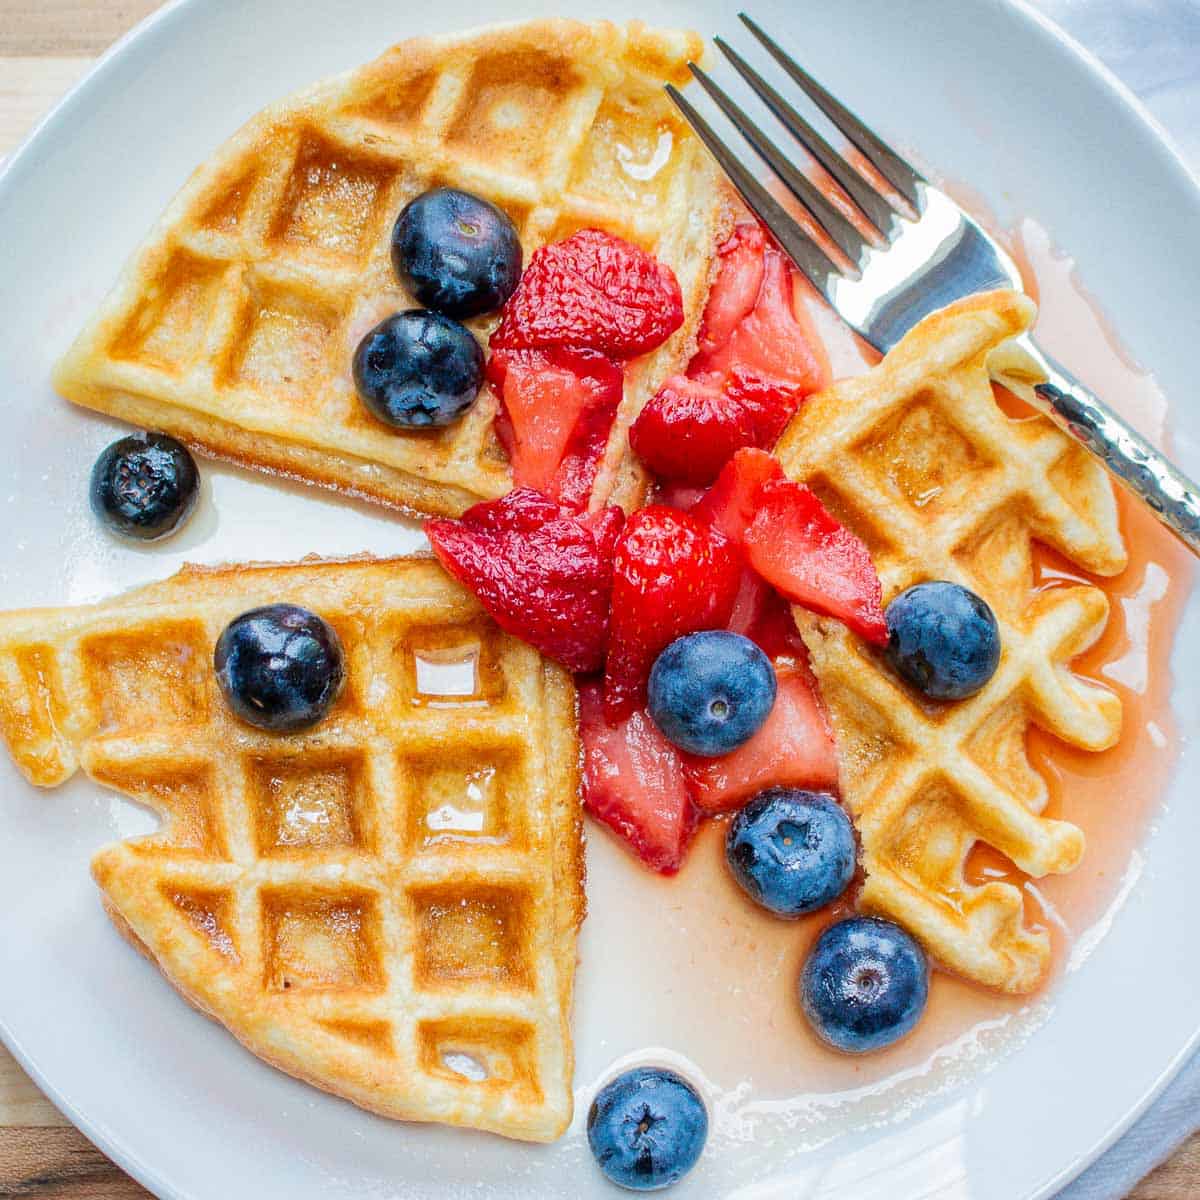 Three pieces of a Homemade Waffle on a white place with strawberries and blueberries and a little maple syrup in the wells of the waffle.